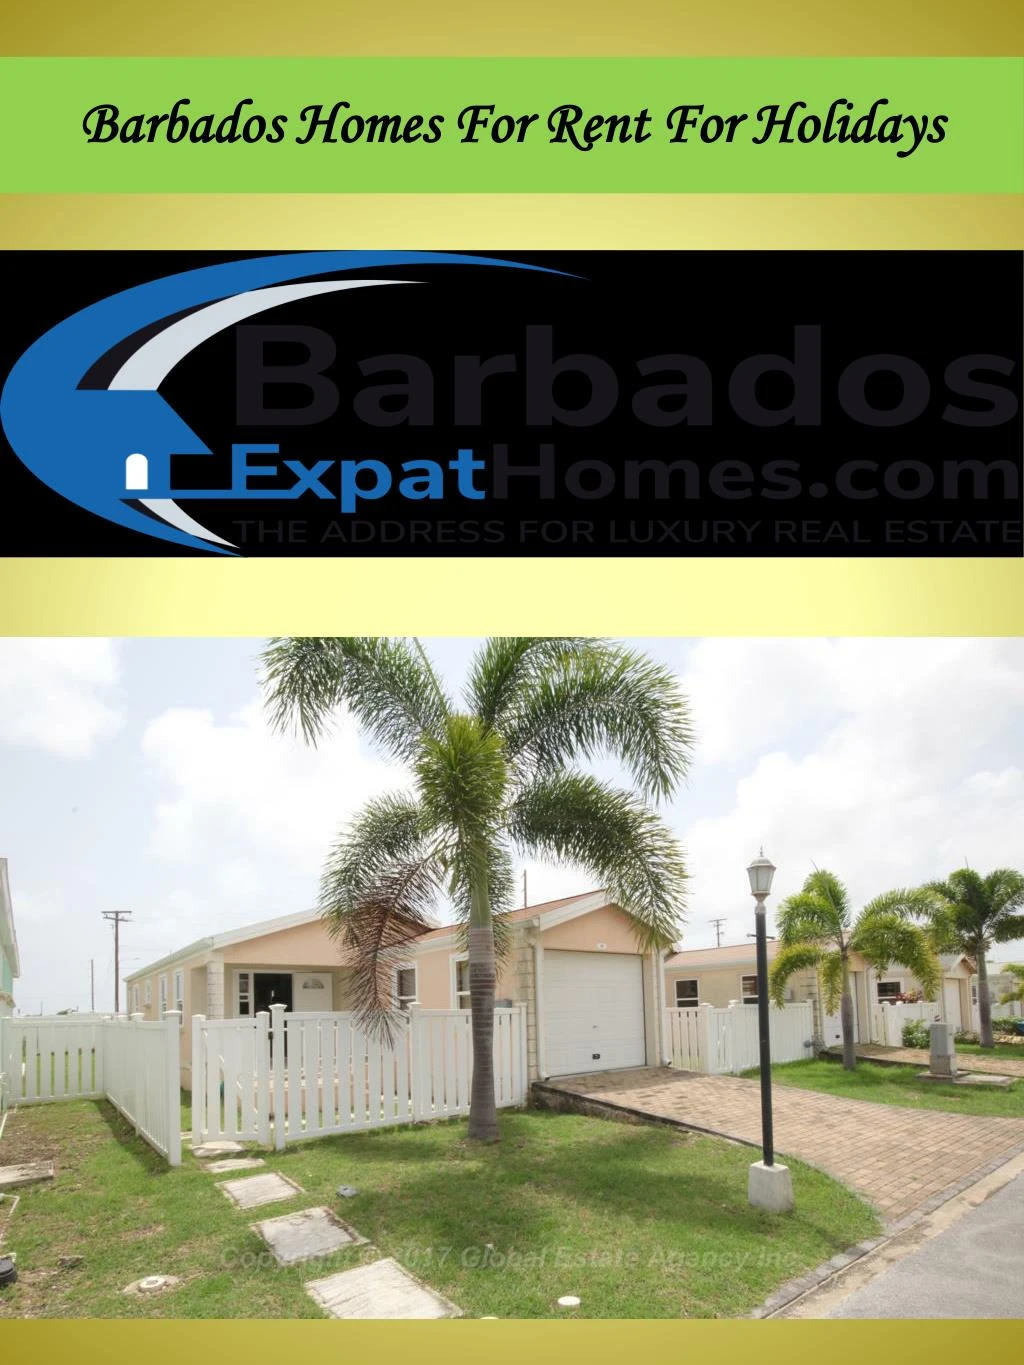 barbados homes for rent for holidays